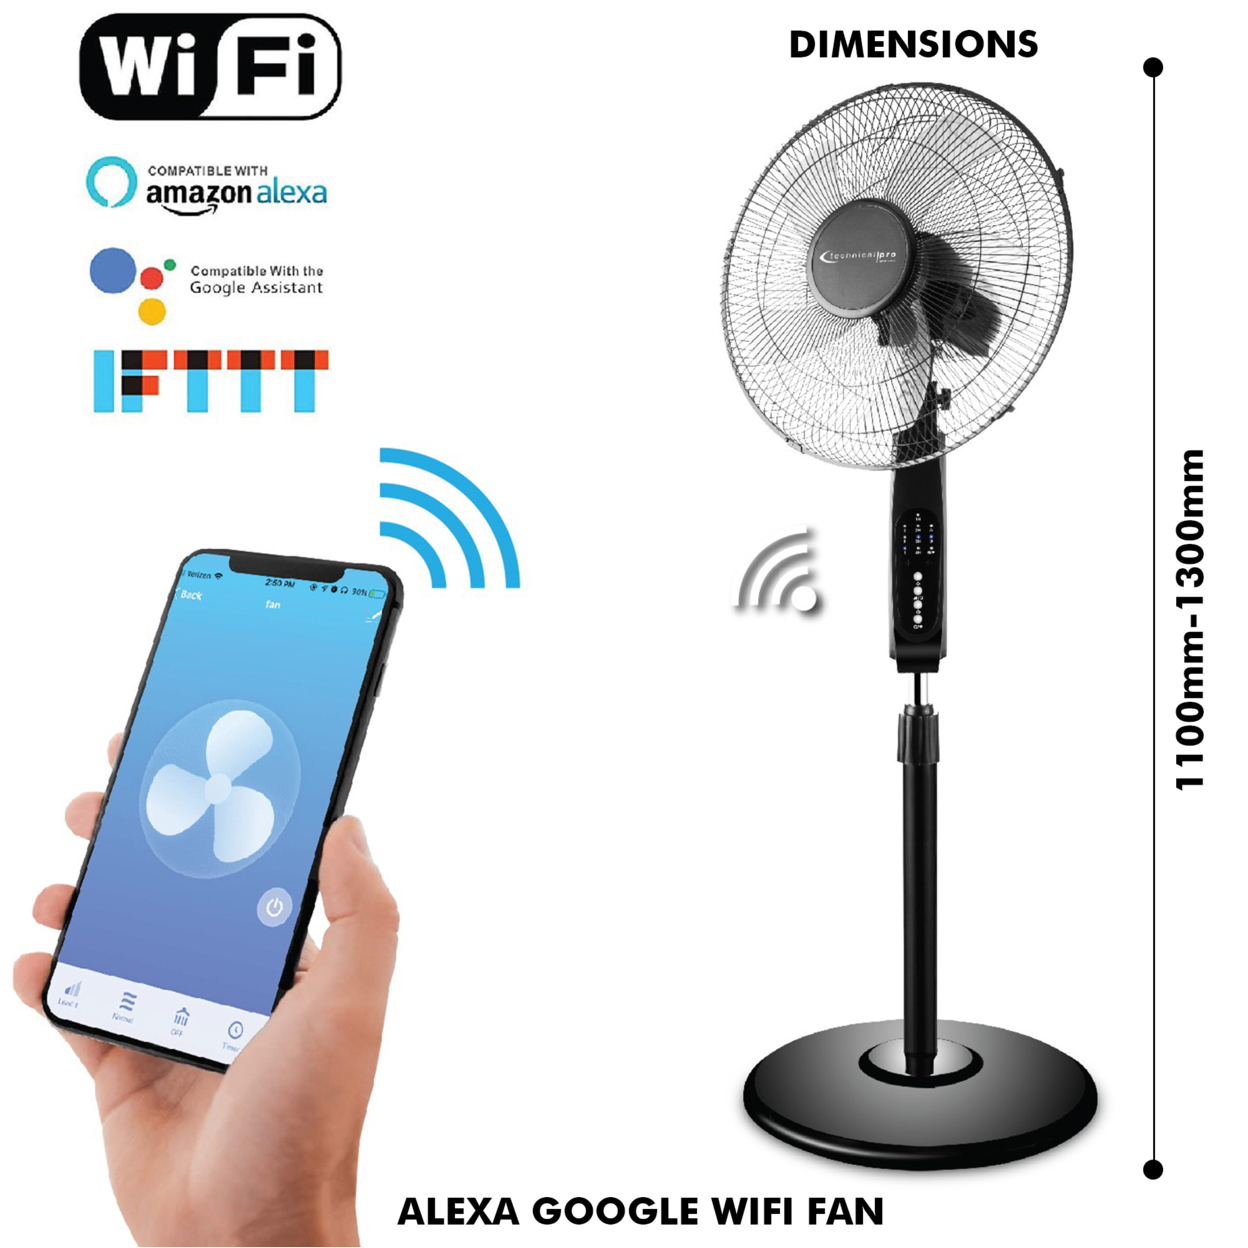 (Qty 2) Technical Pro WIFI Enabled 16 Inch Standing Fan With Oscillating Feature And Compatible W/ Voice Control & Smart Home App (Black)